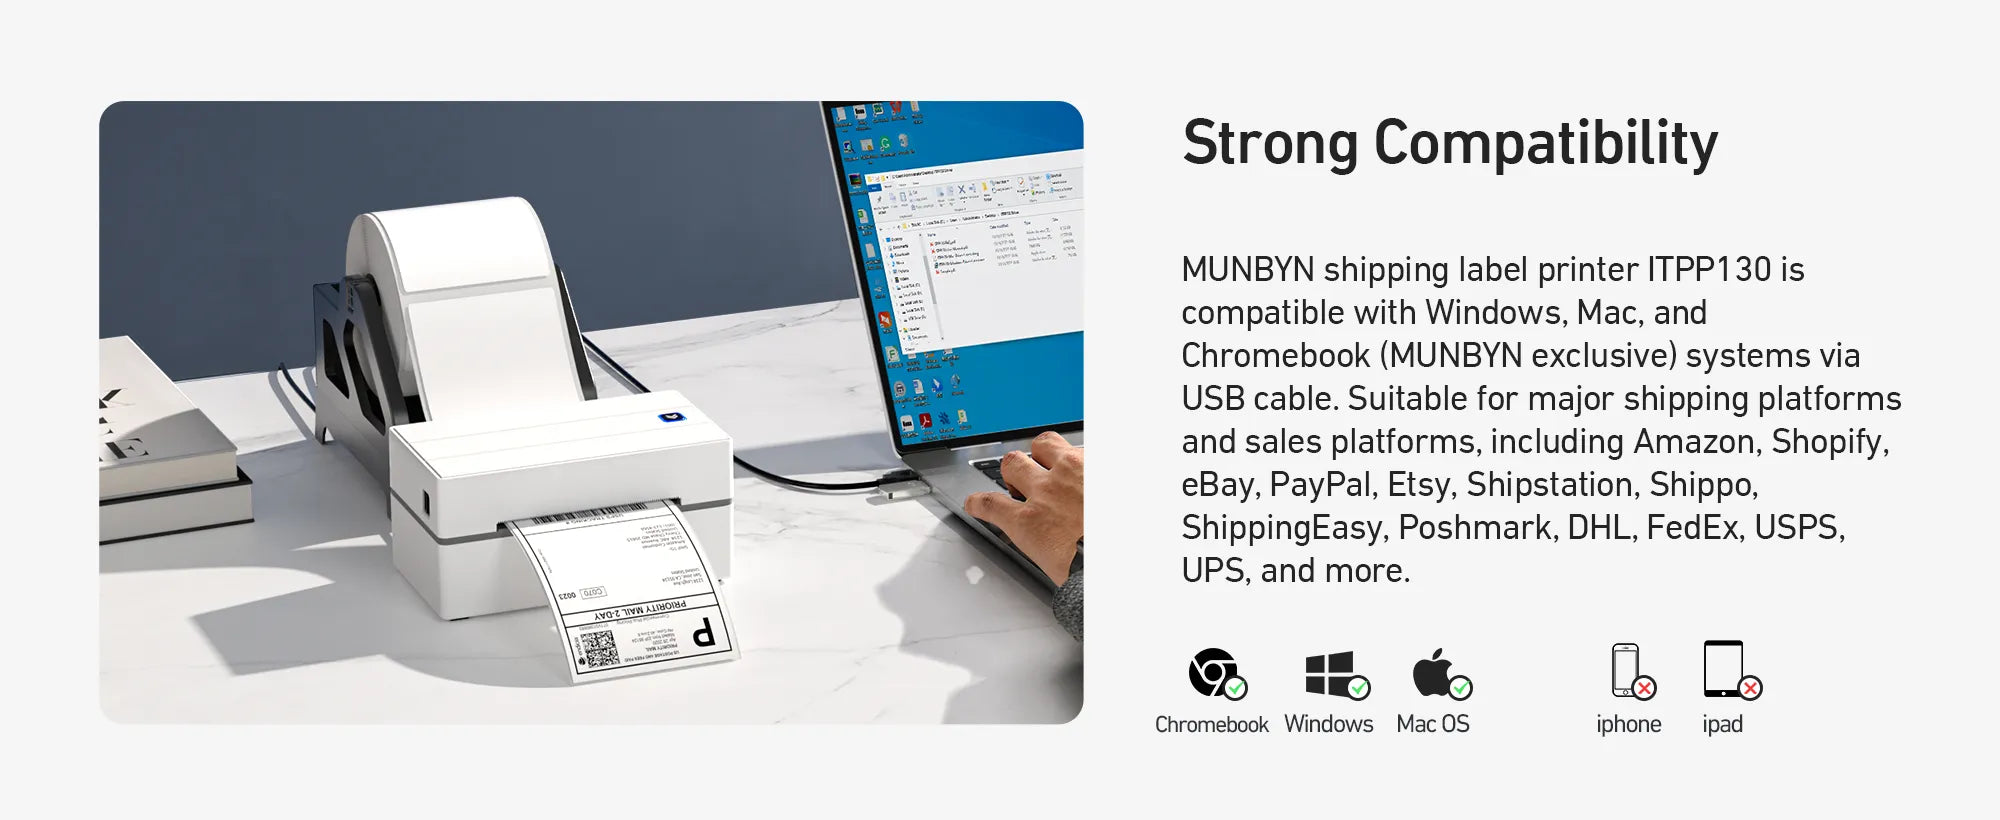 MUNBYN P130 thermal printer has a USB interface for computer connection and works with various operating systems, such as Windows, Chromebook and Mac.